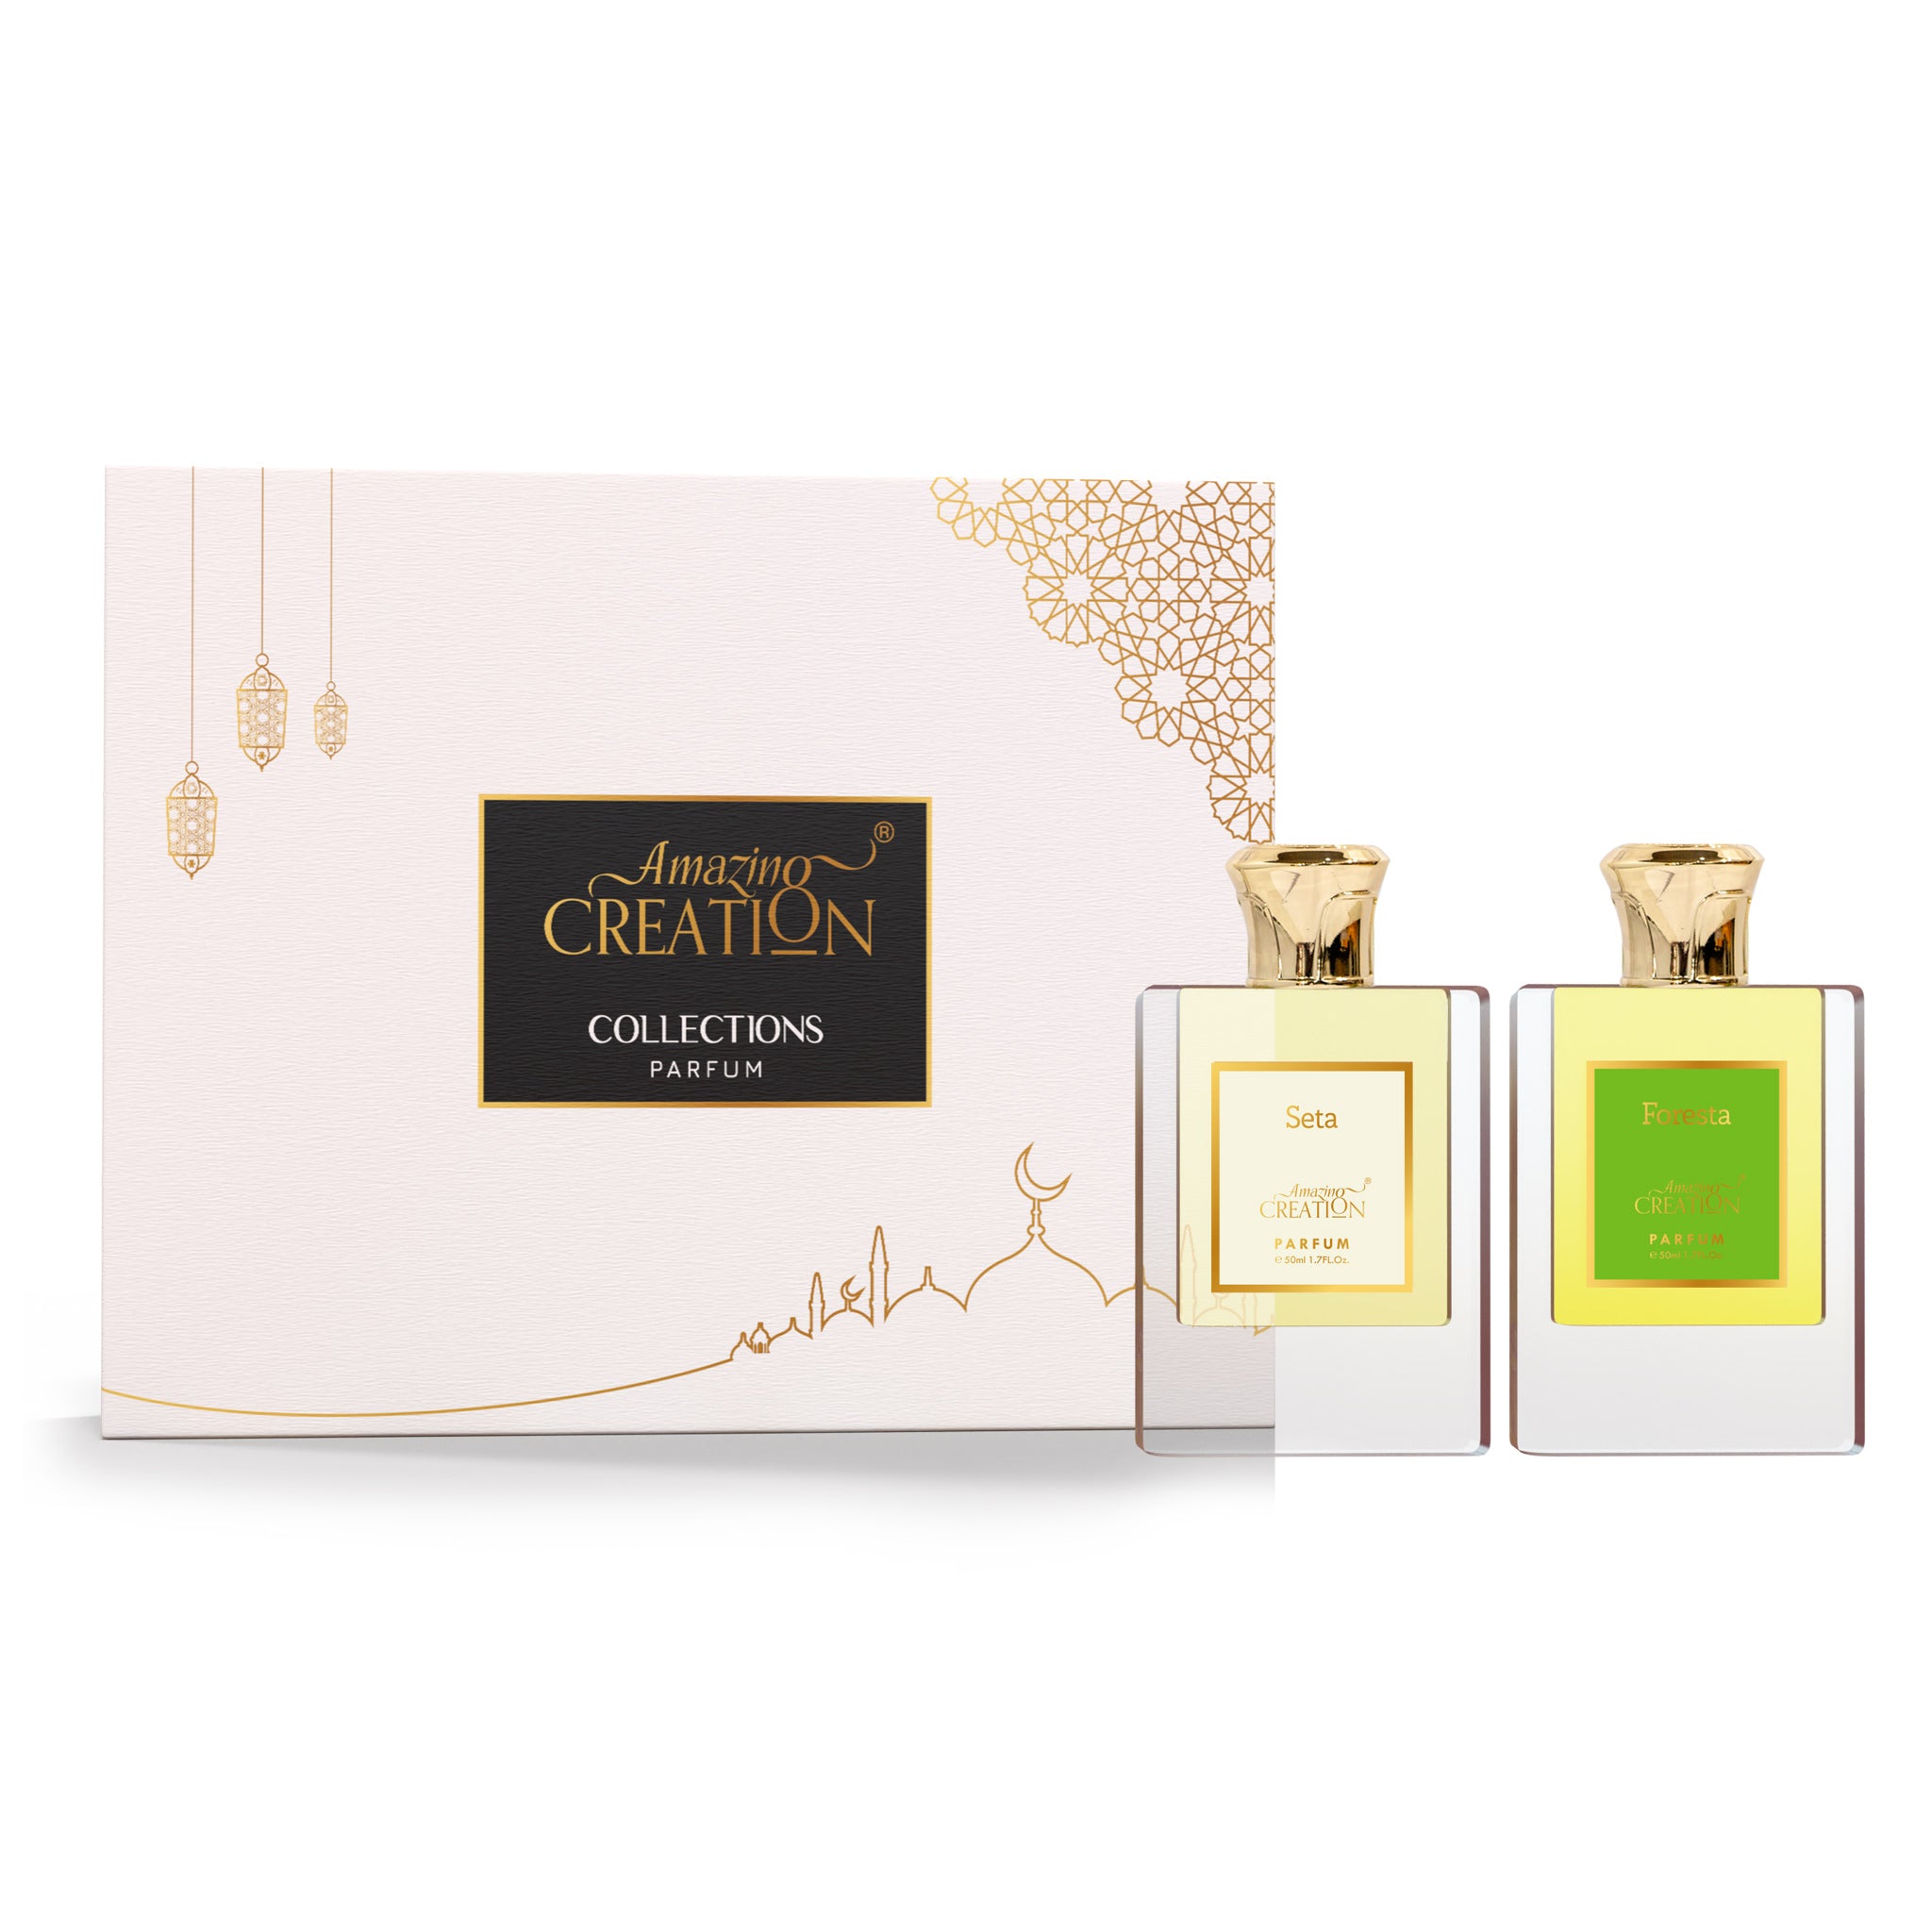 Amazing Creation Collections Gifts Set For Men and Women - samawa perfumes 